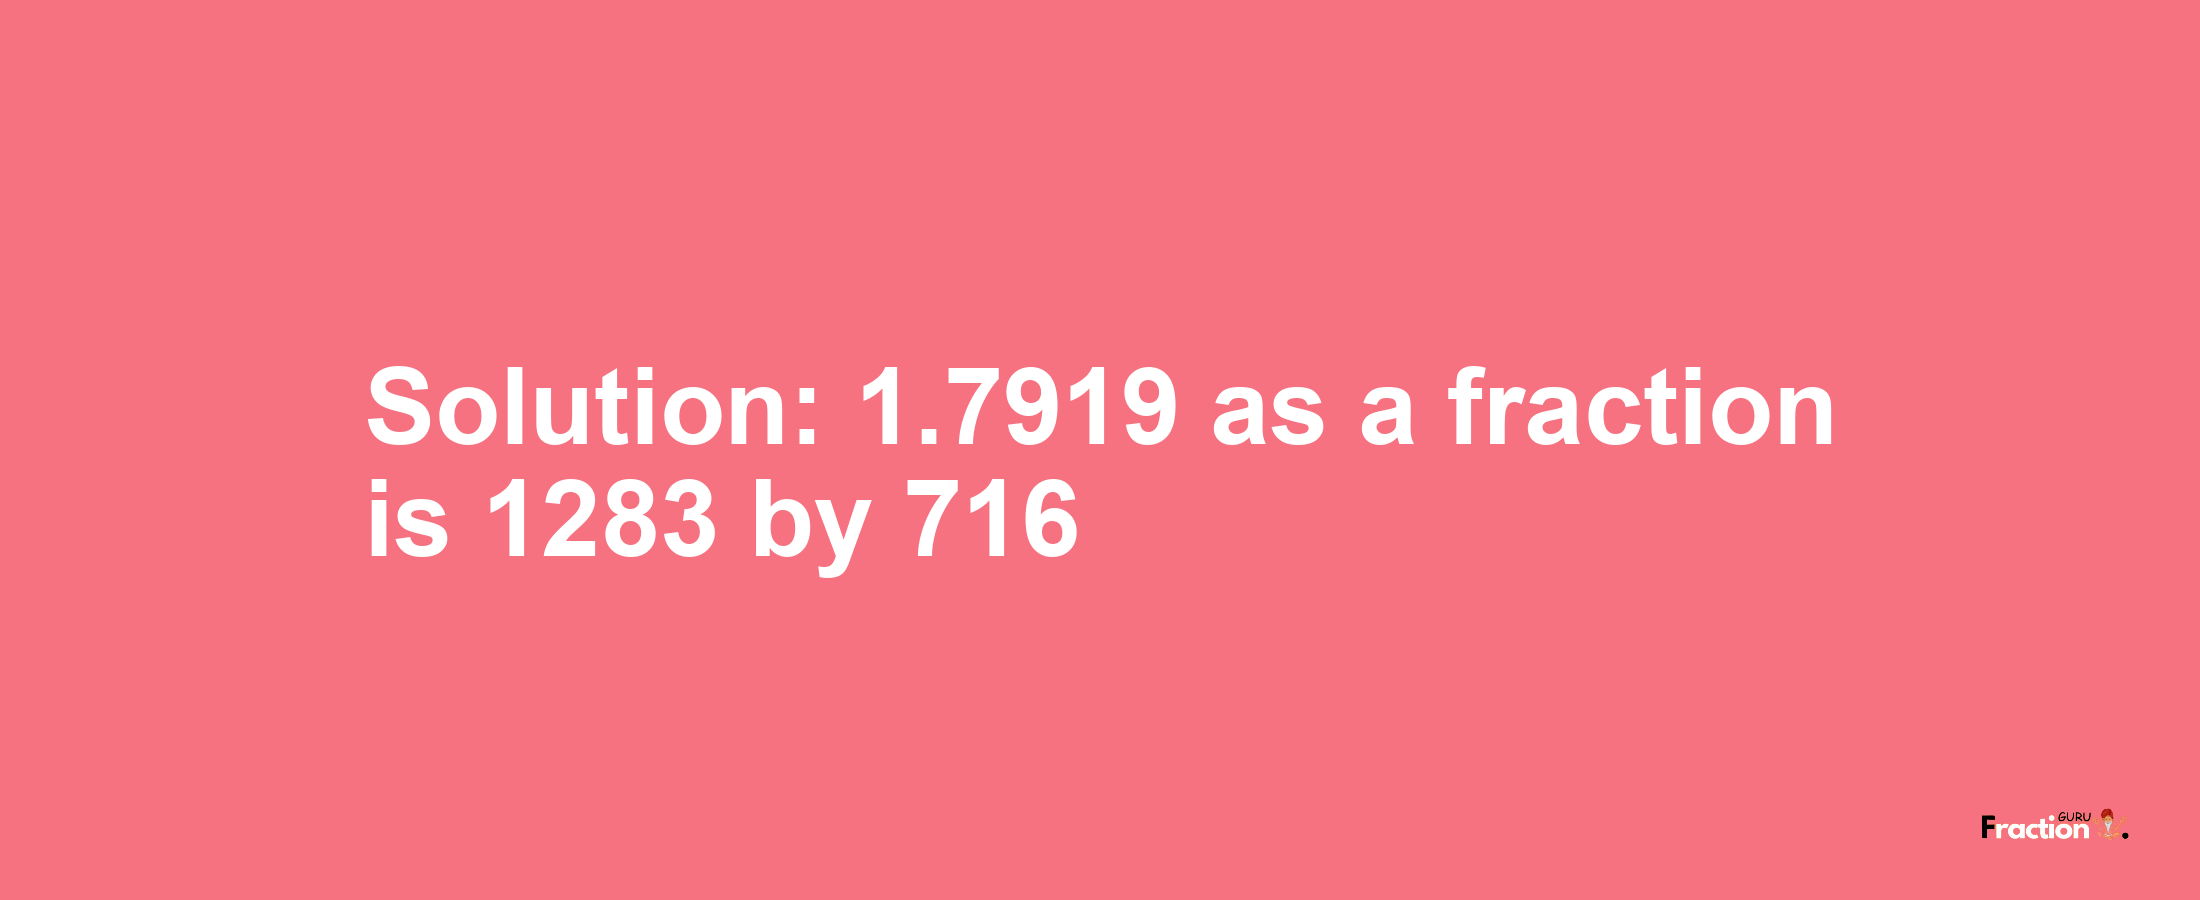 Solution:1.7919 as a fraction is 1283/716